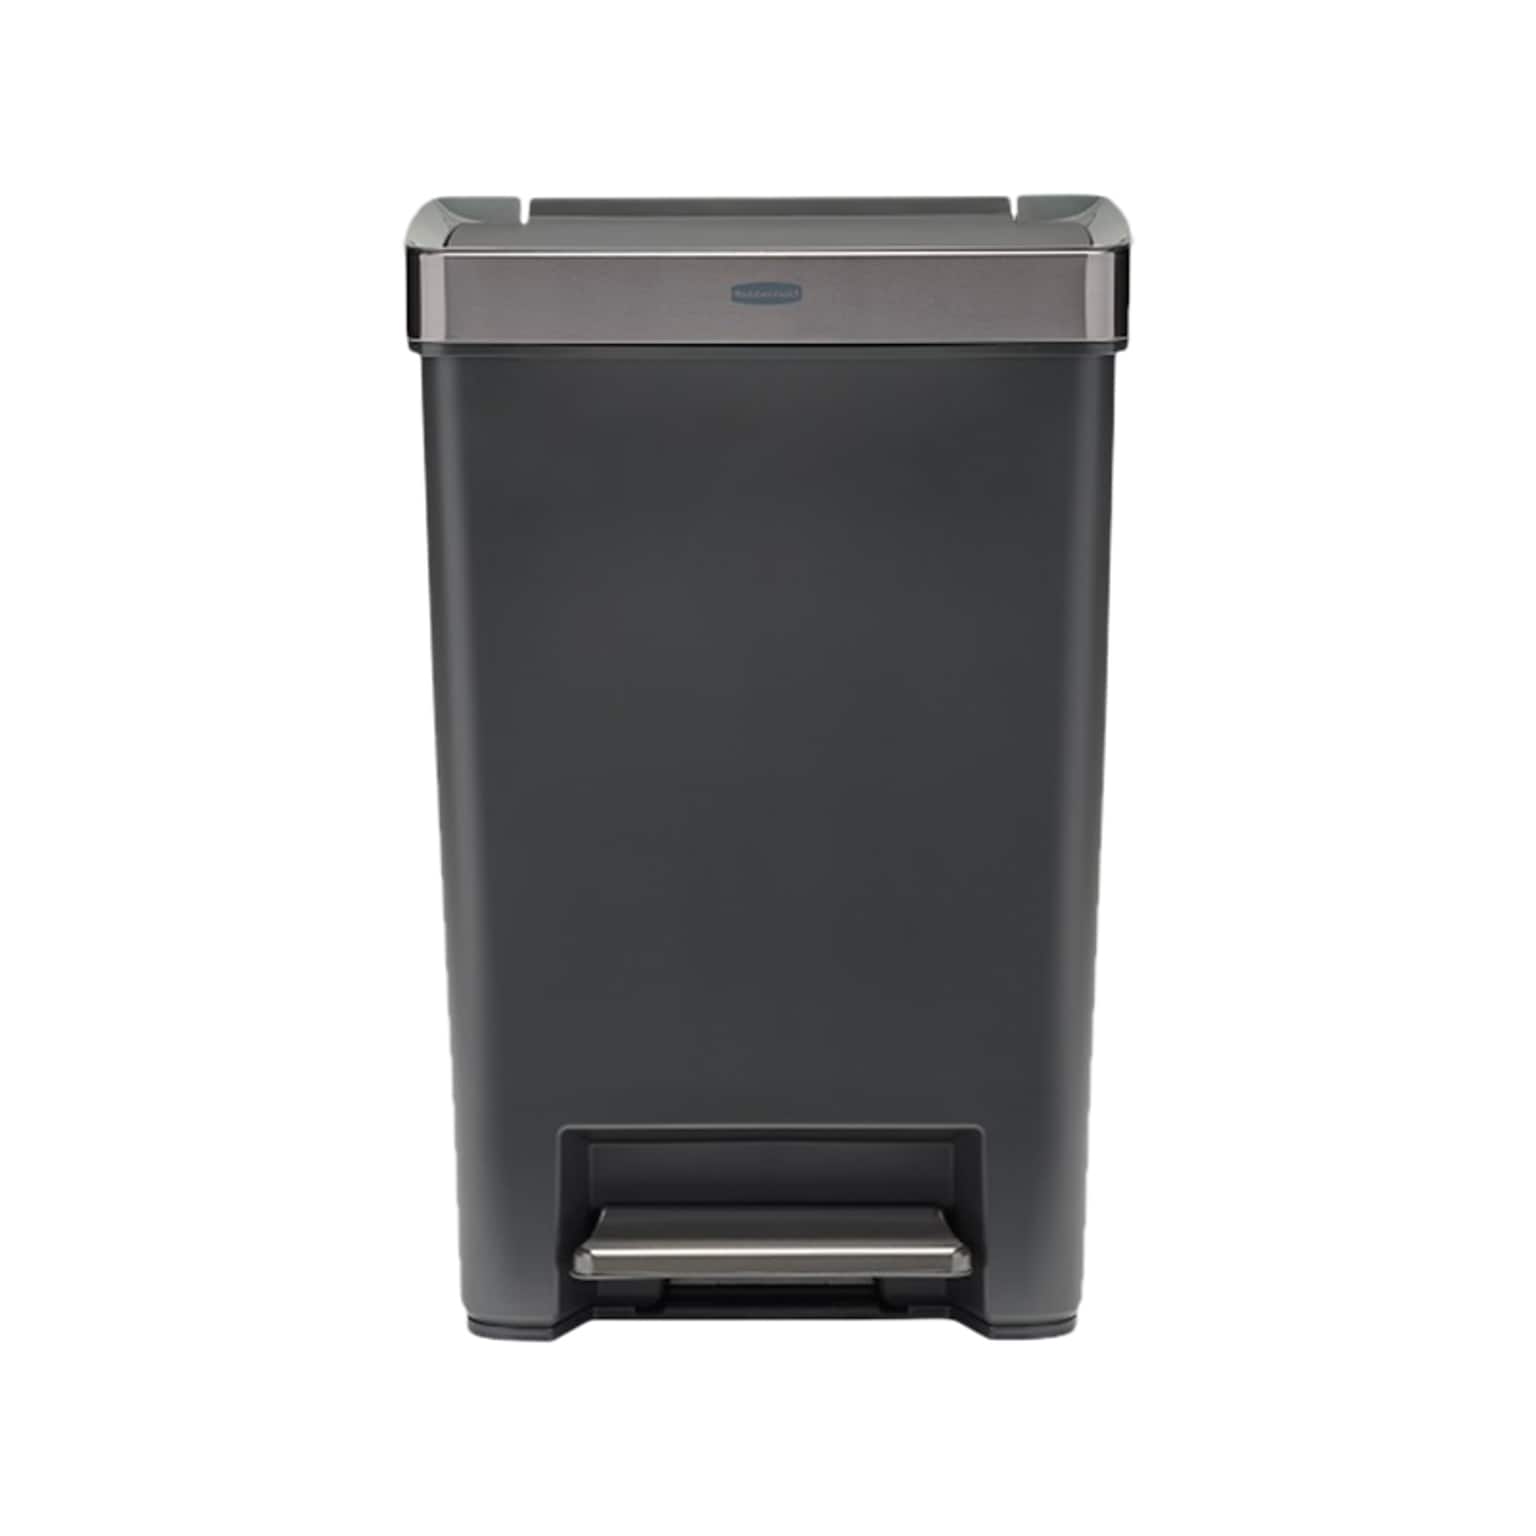 Rubbermaid Premier Series III Indoor Step-On Trash Can with Lid, 12.4 Gallon, Black (2120983)